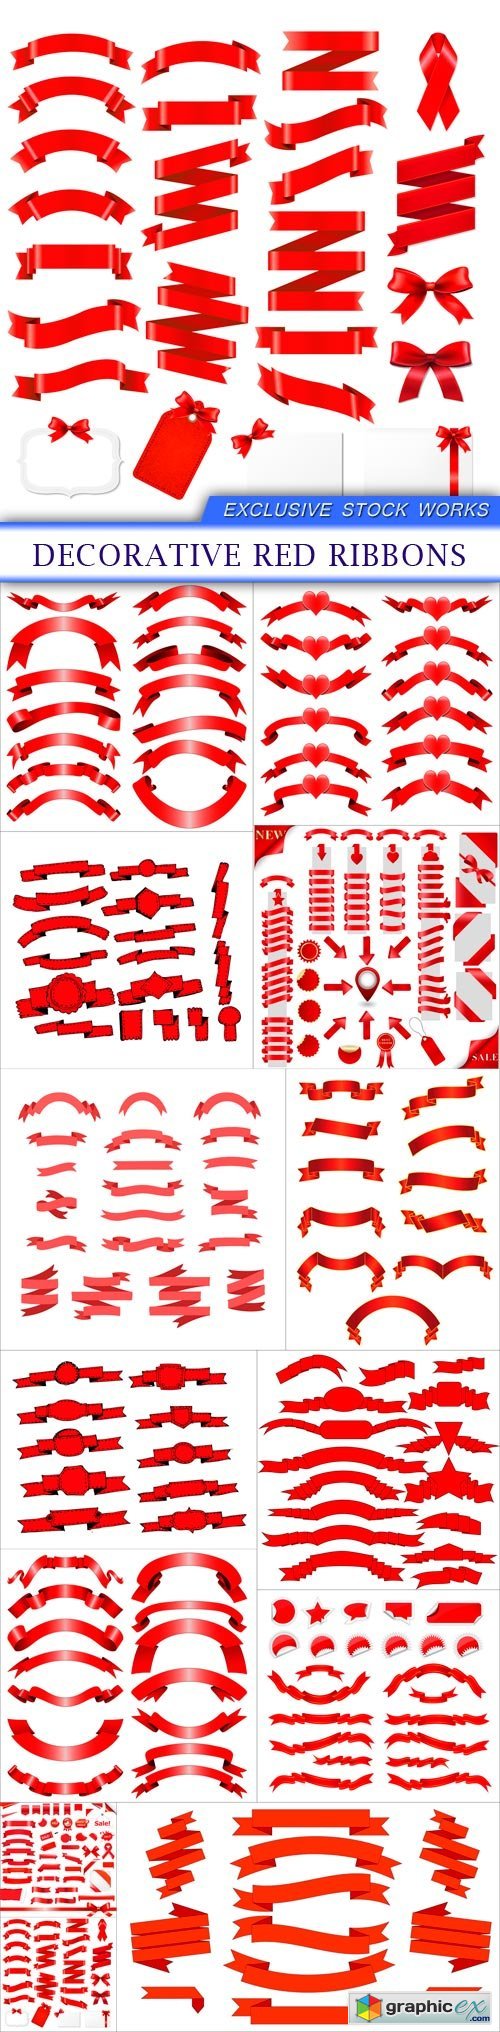 Decorative red ribbons 13x EPS